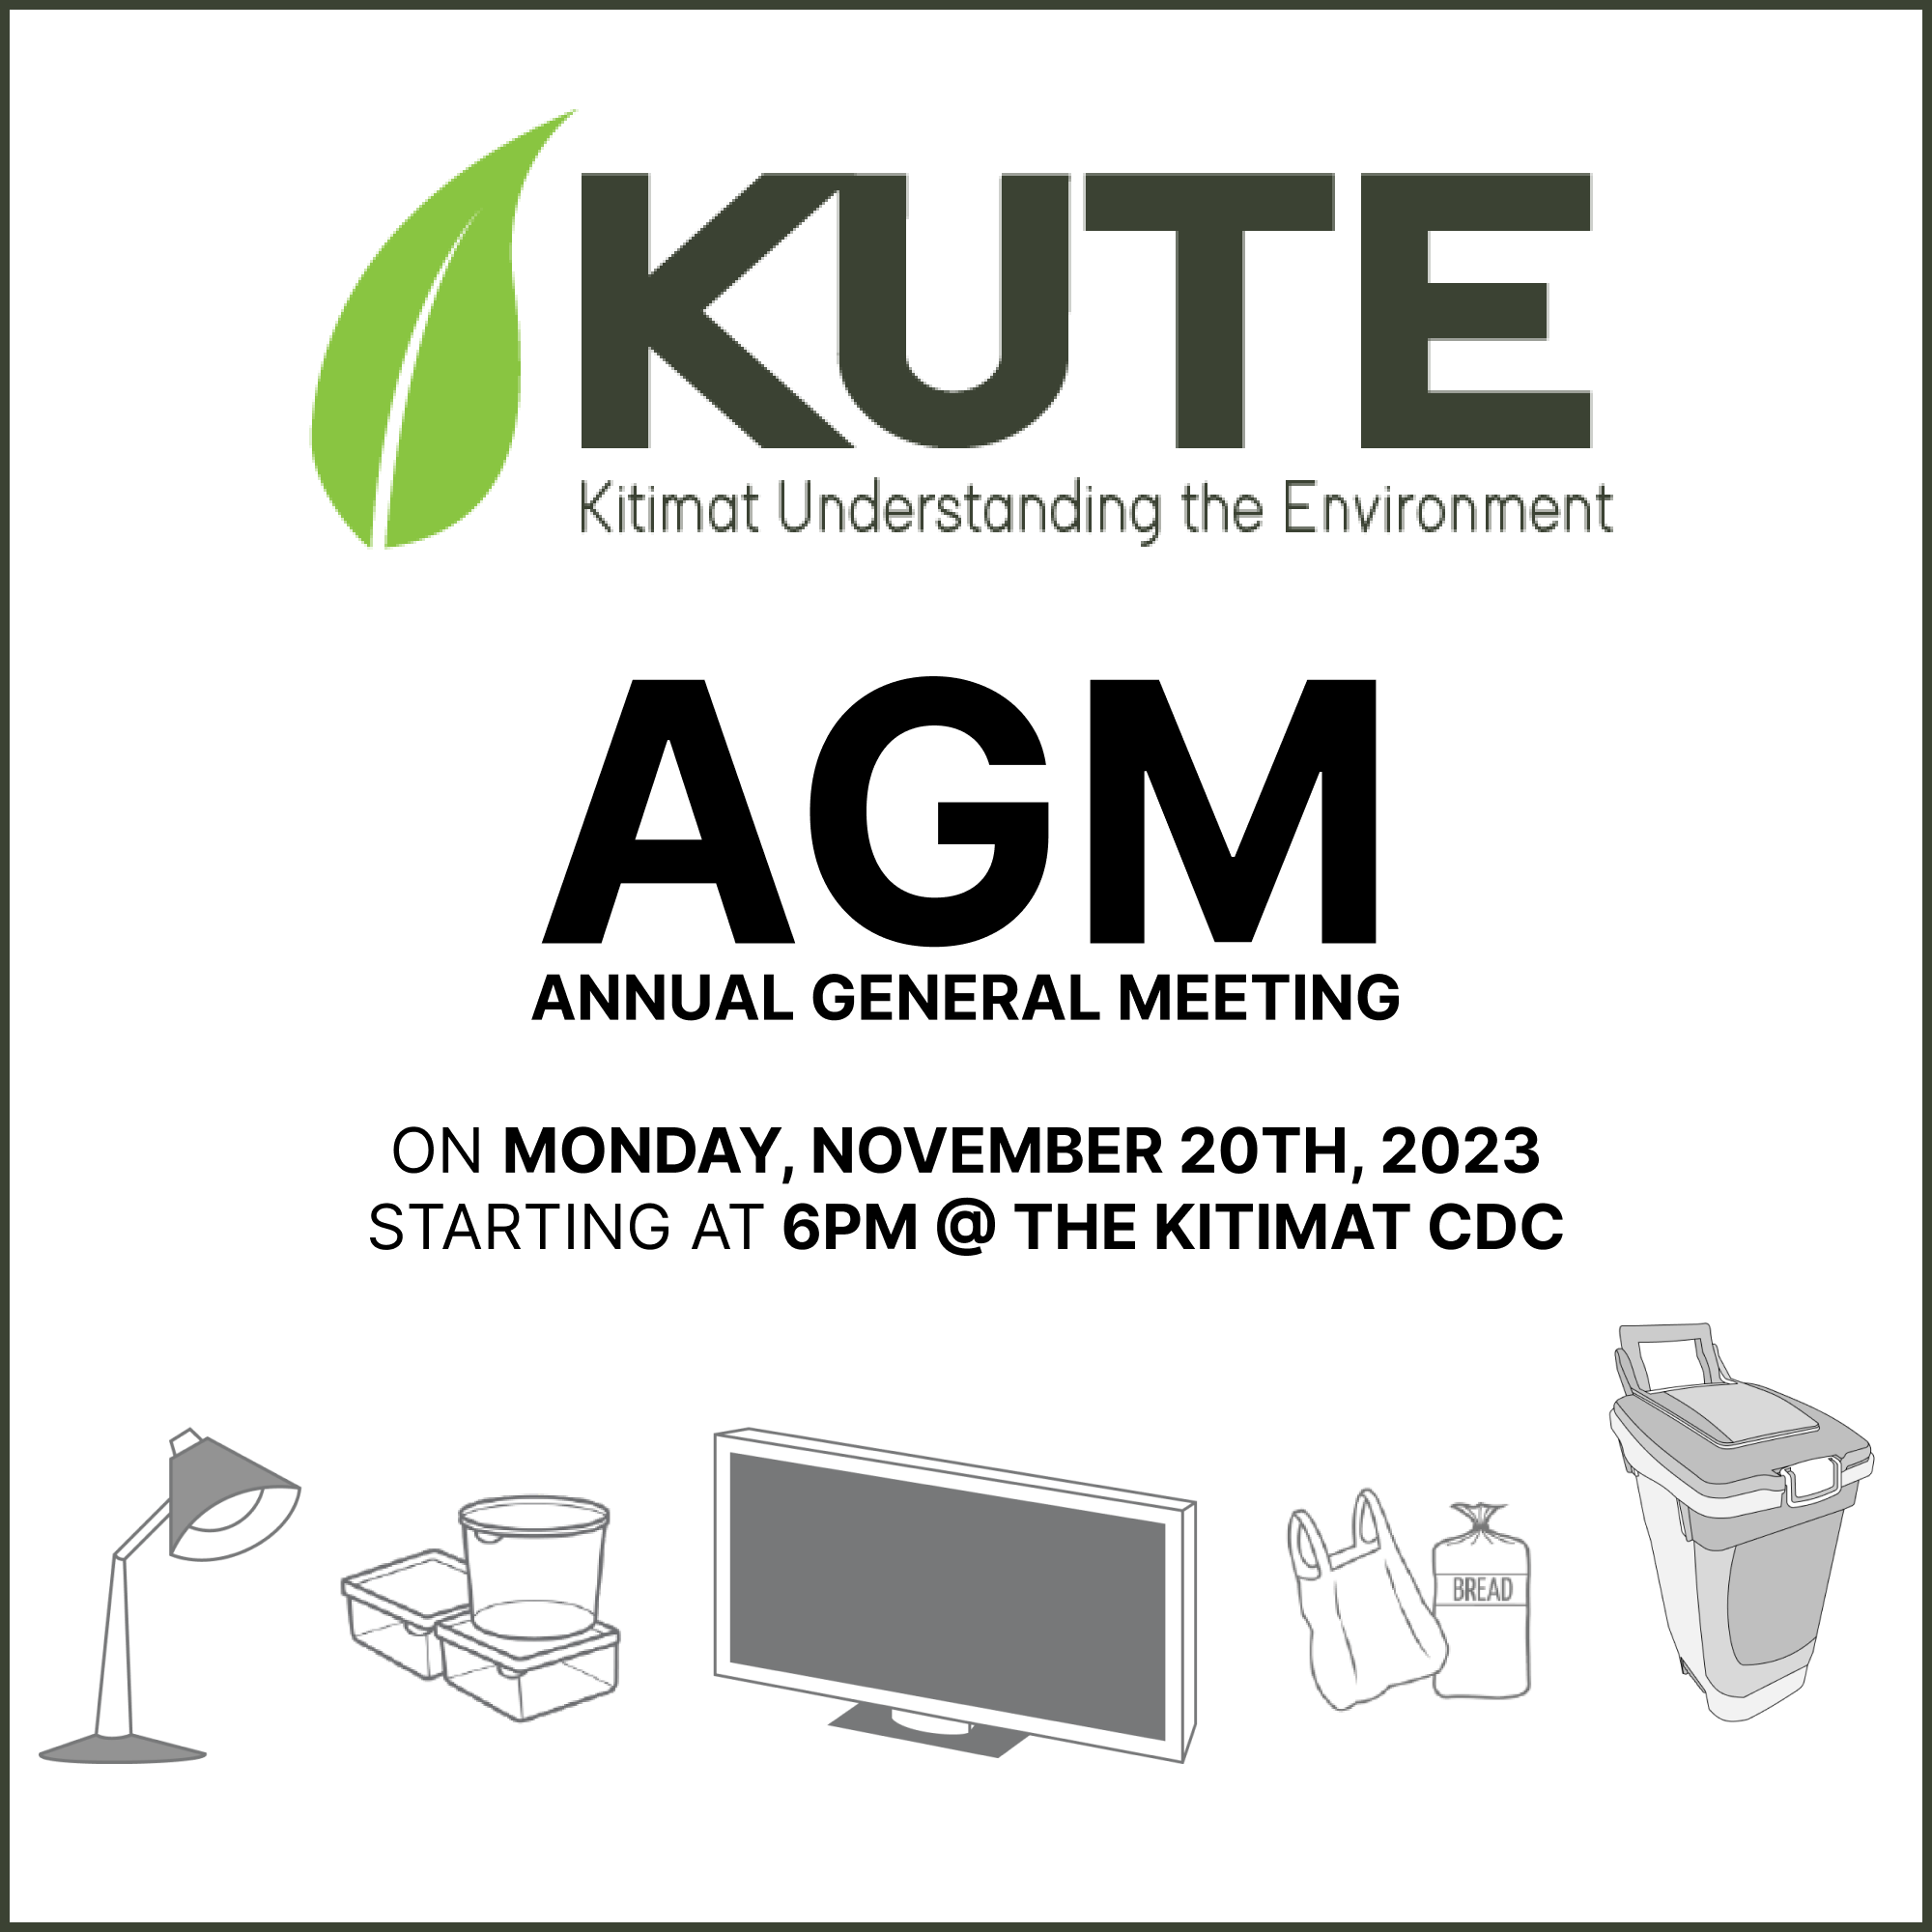 KUTE Logo, Kitmat Understanding the Environment, center text reads: AGM, Annual General Meeting, on Monday, November 20th, 2023, Starting at 6pm at the Kitimat CDC. Followed by images of items related to KUTE: a lamp, plastic tupperware containers, a television, plastic bags, & a green food waste bin